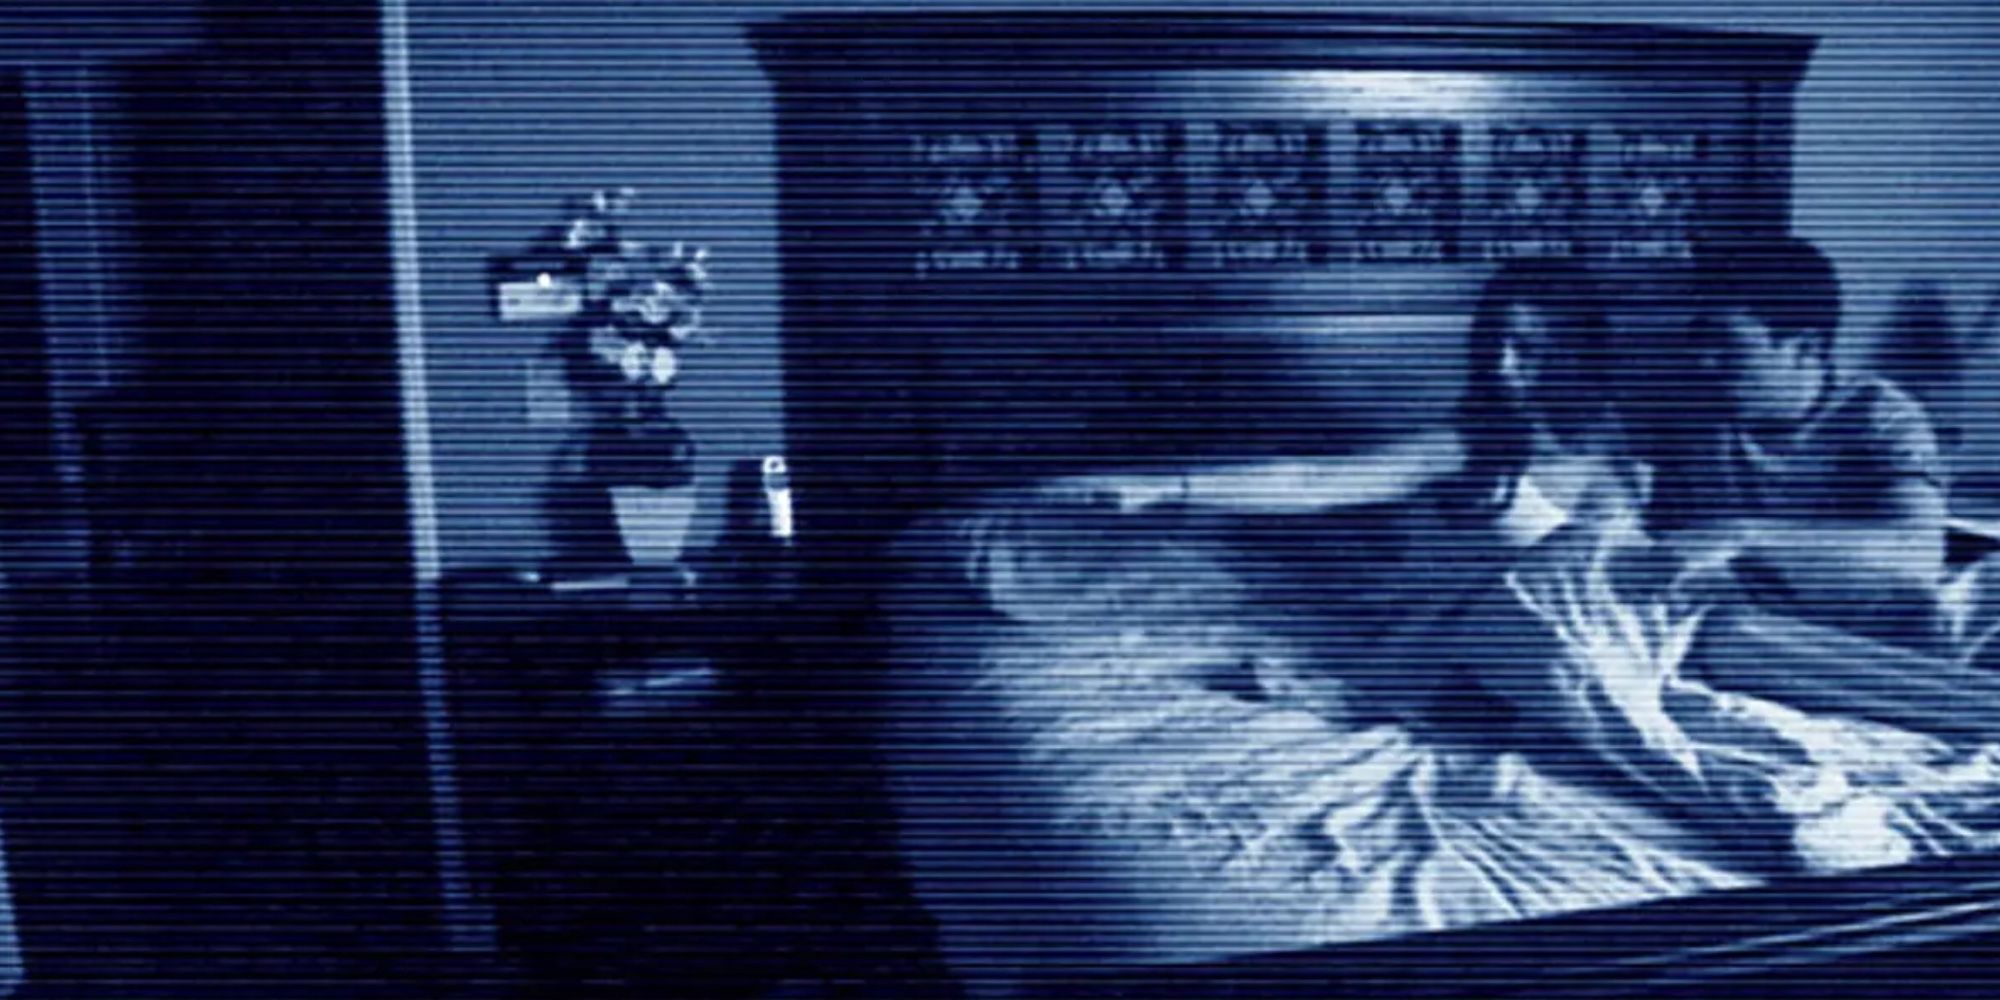 Paranormal Activity Couple on camera while sleeping